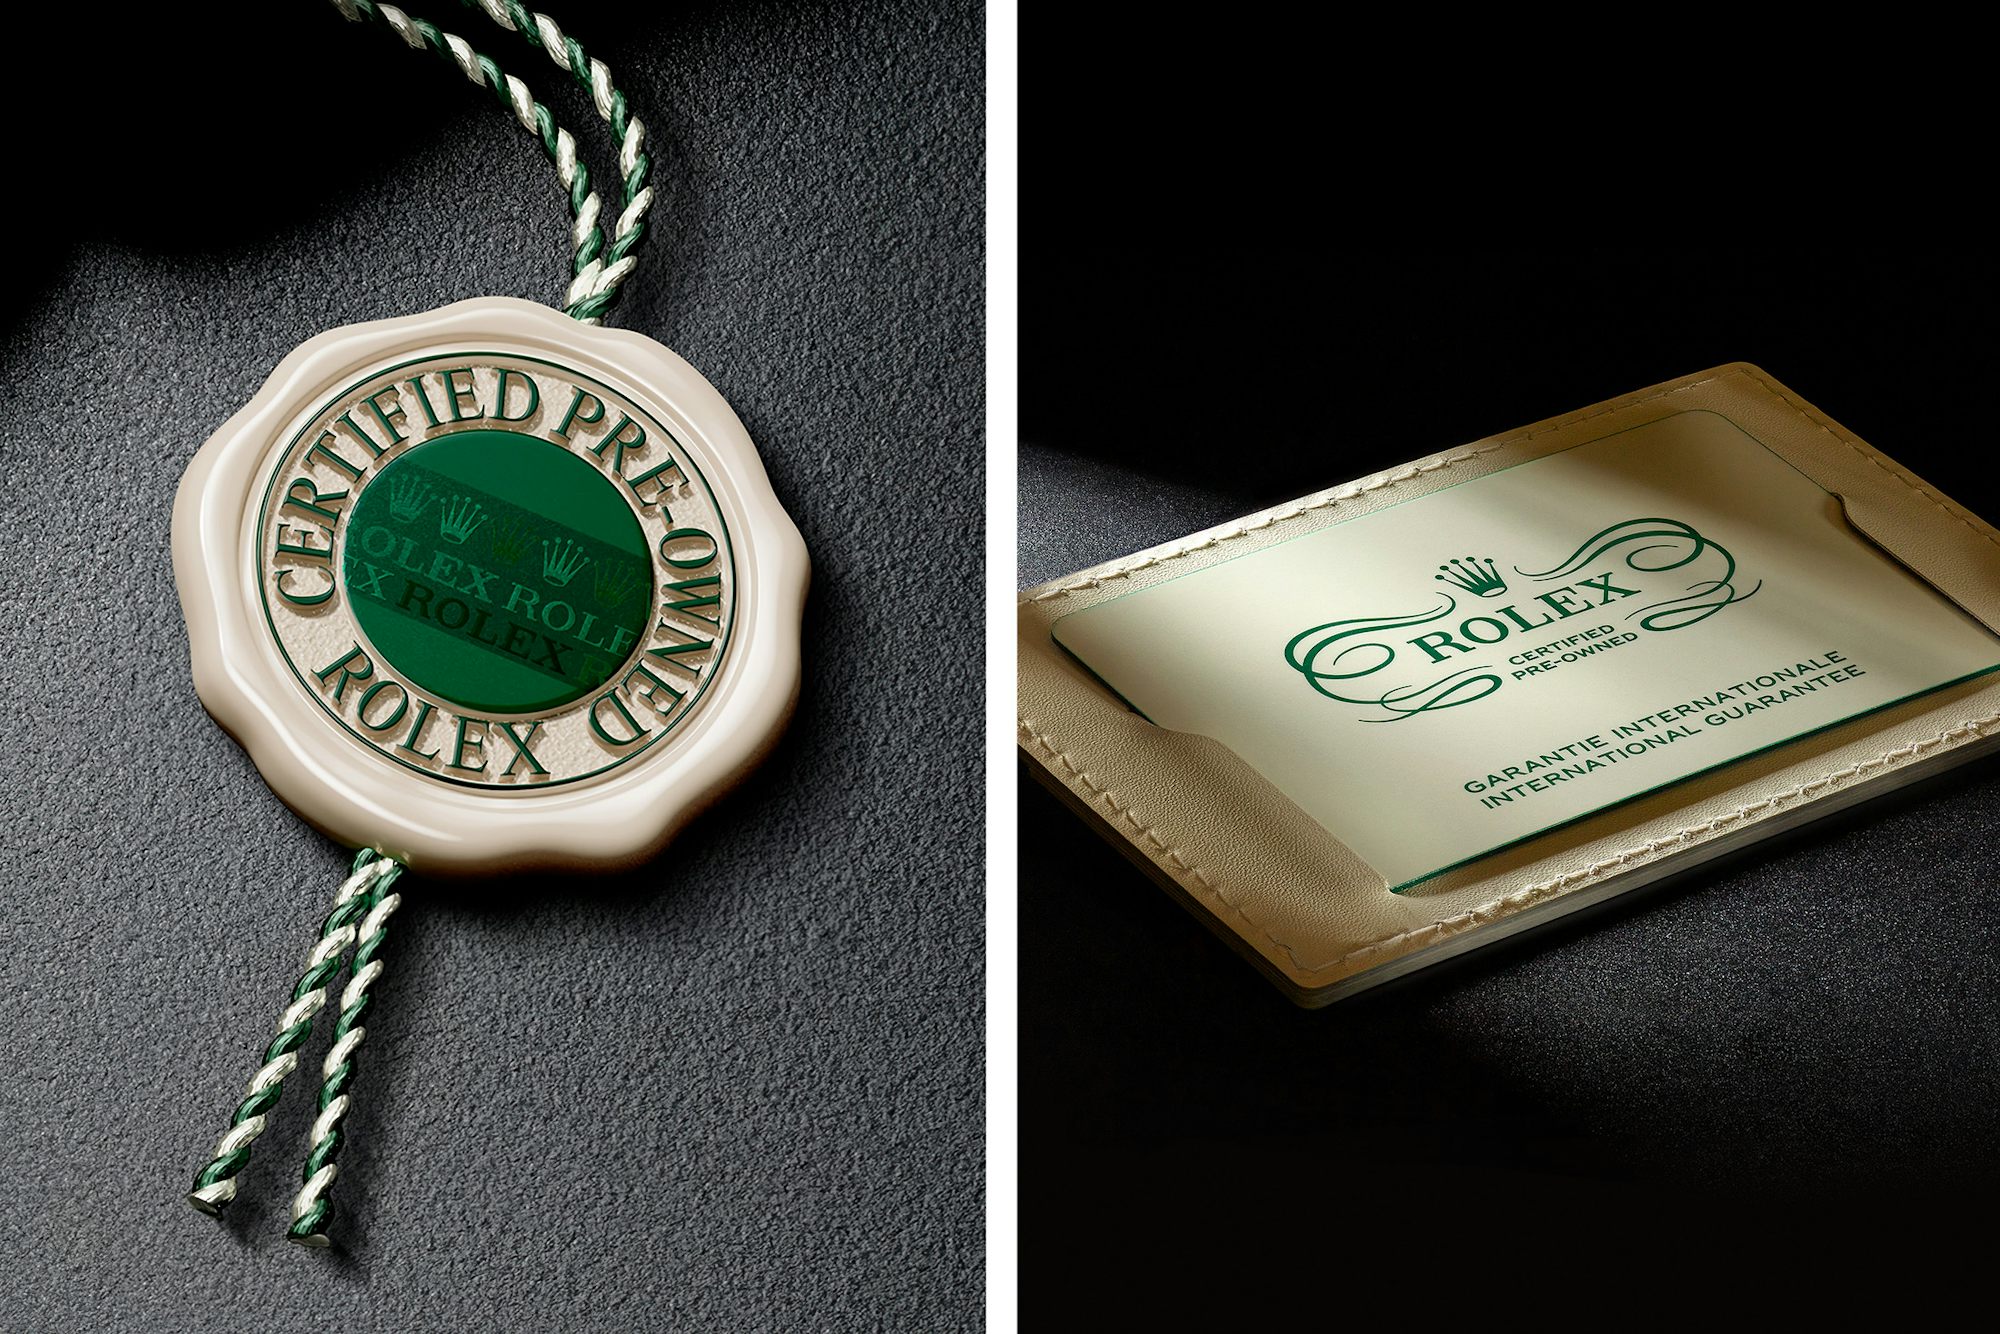 Rolex Certified Pre-Owned Tags